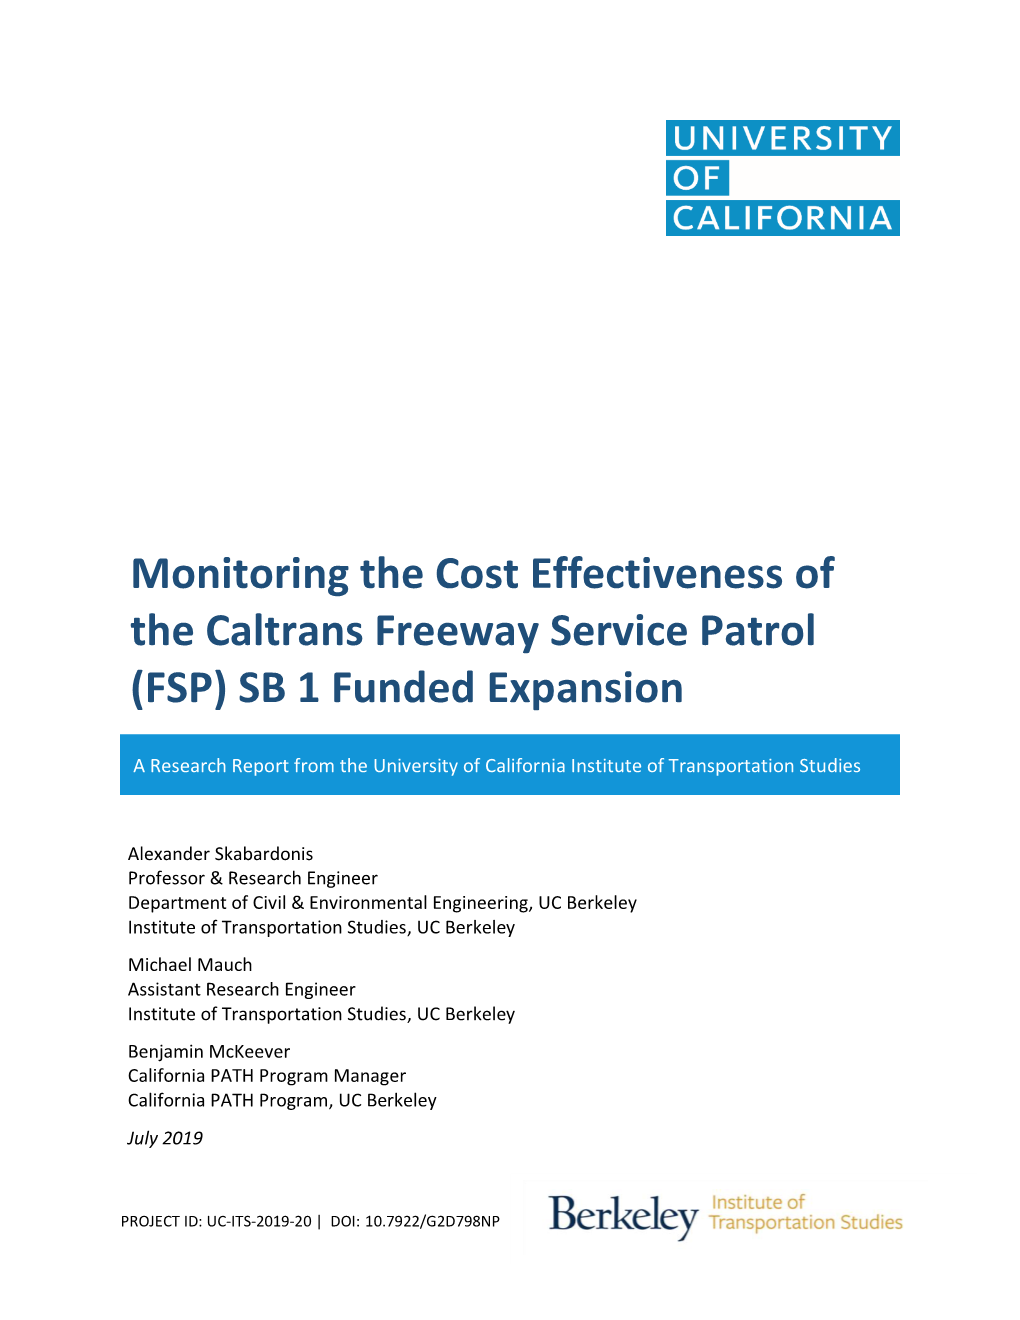 Monitoring the Cost Effectiveness of the Caltrans Freeway Service Patrol (FSP) SB 1 Funded Expansion